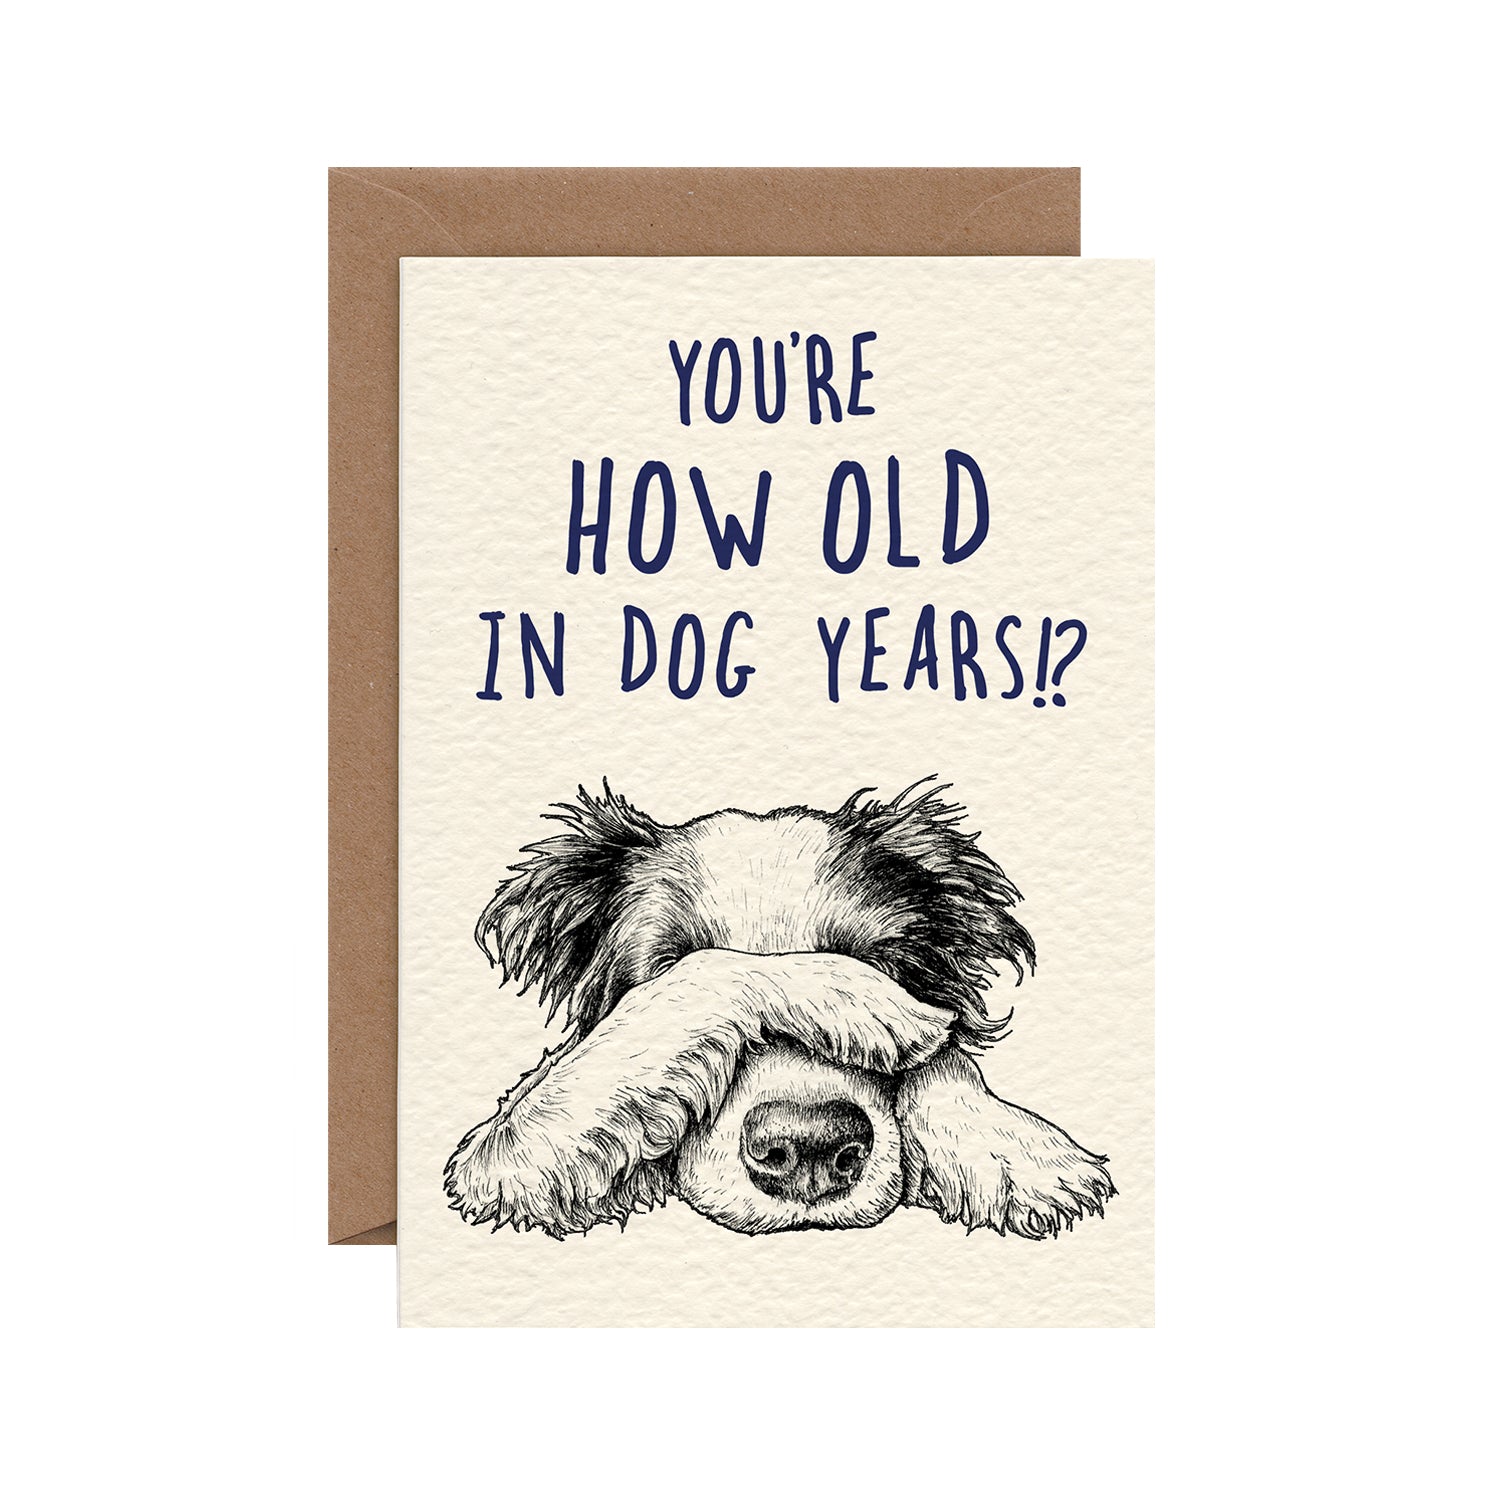 A funny ink illustration of a dog covering its eyes, with the caption &quot;You&